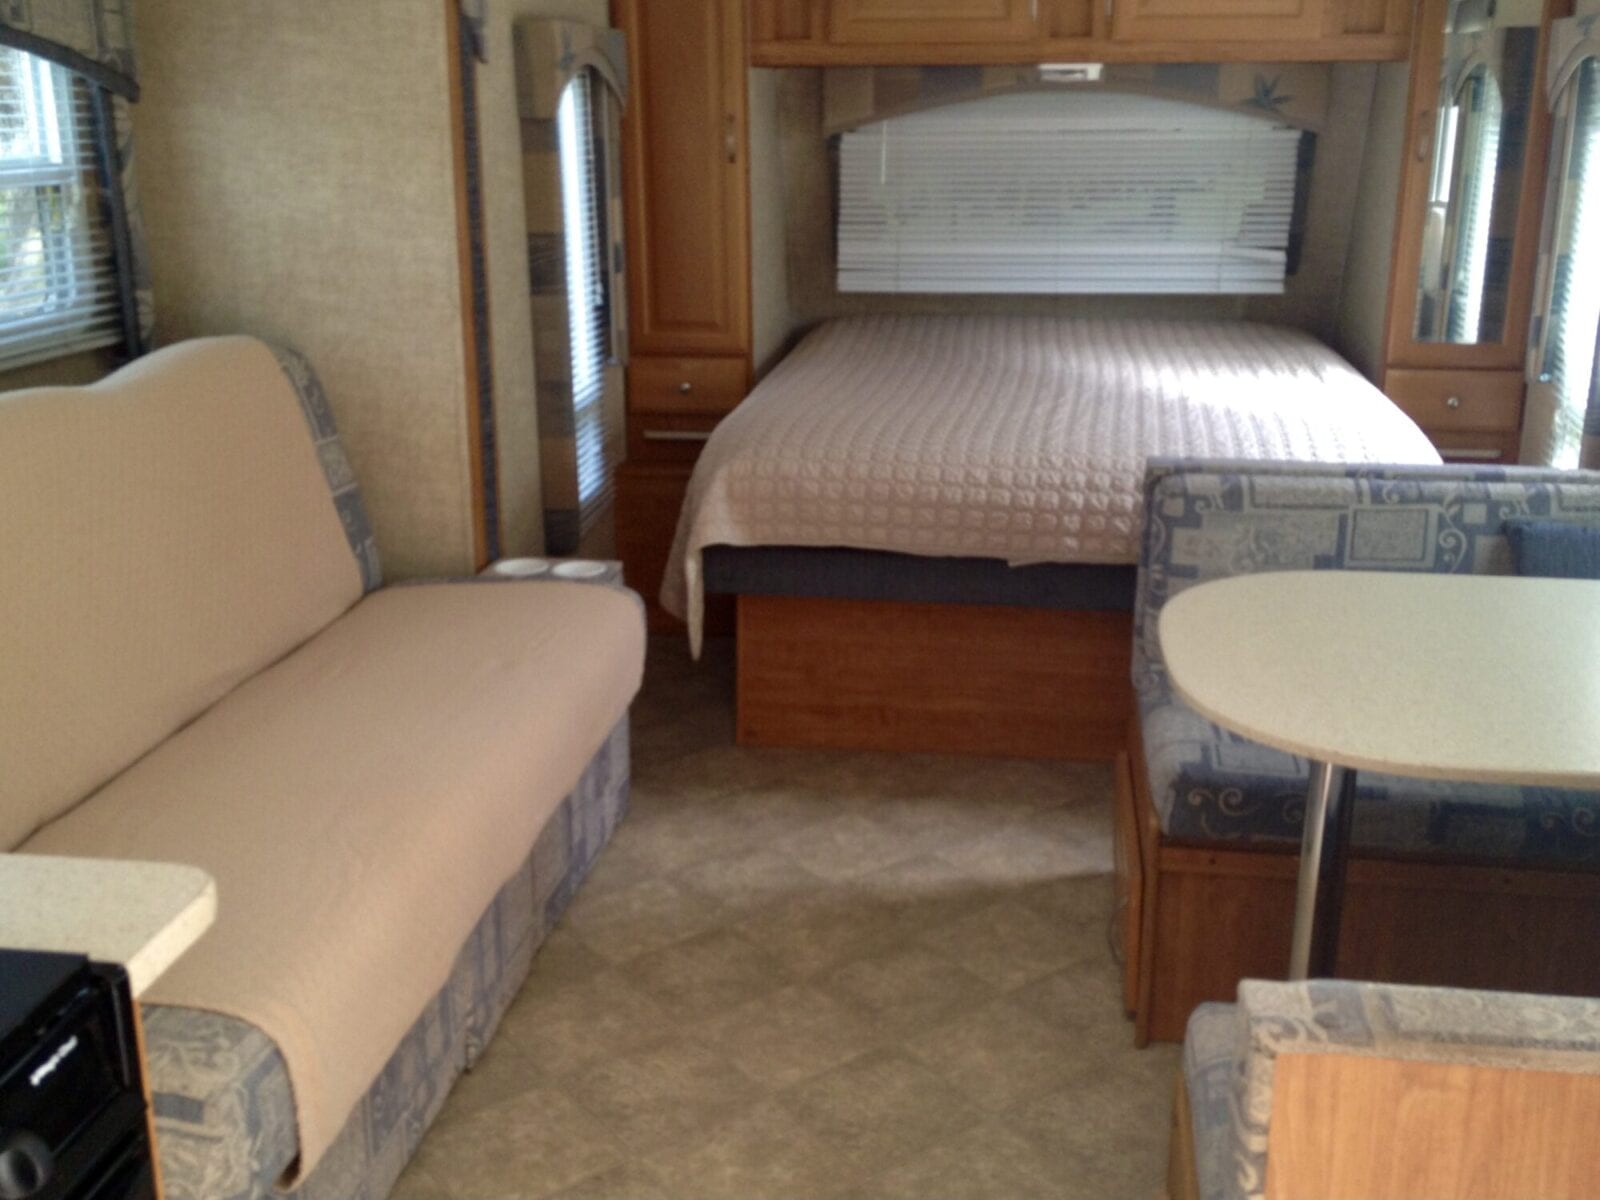 Our Dog Friendly RV from Paso Robles RV Rental